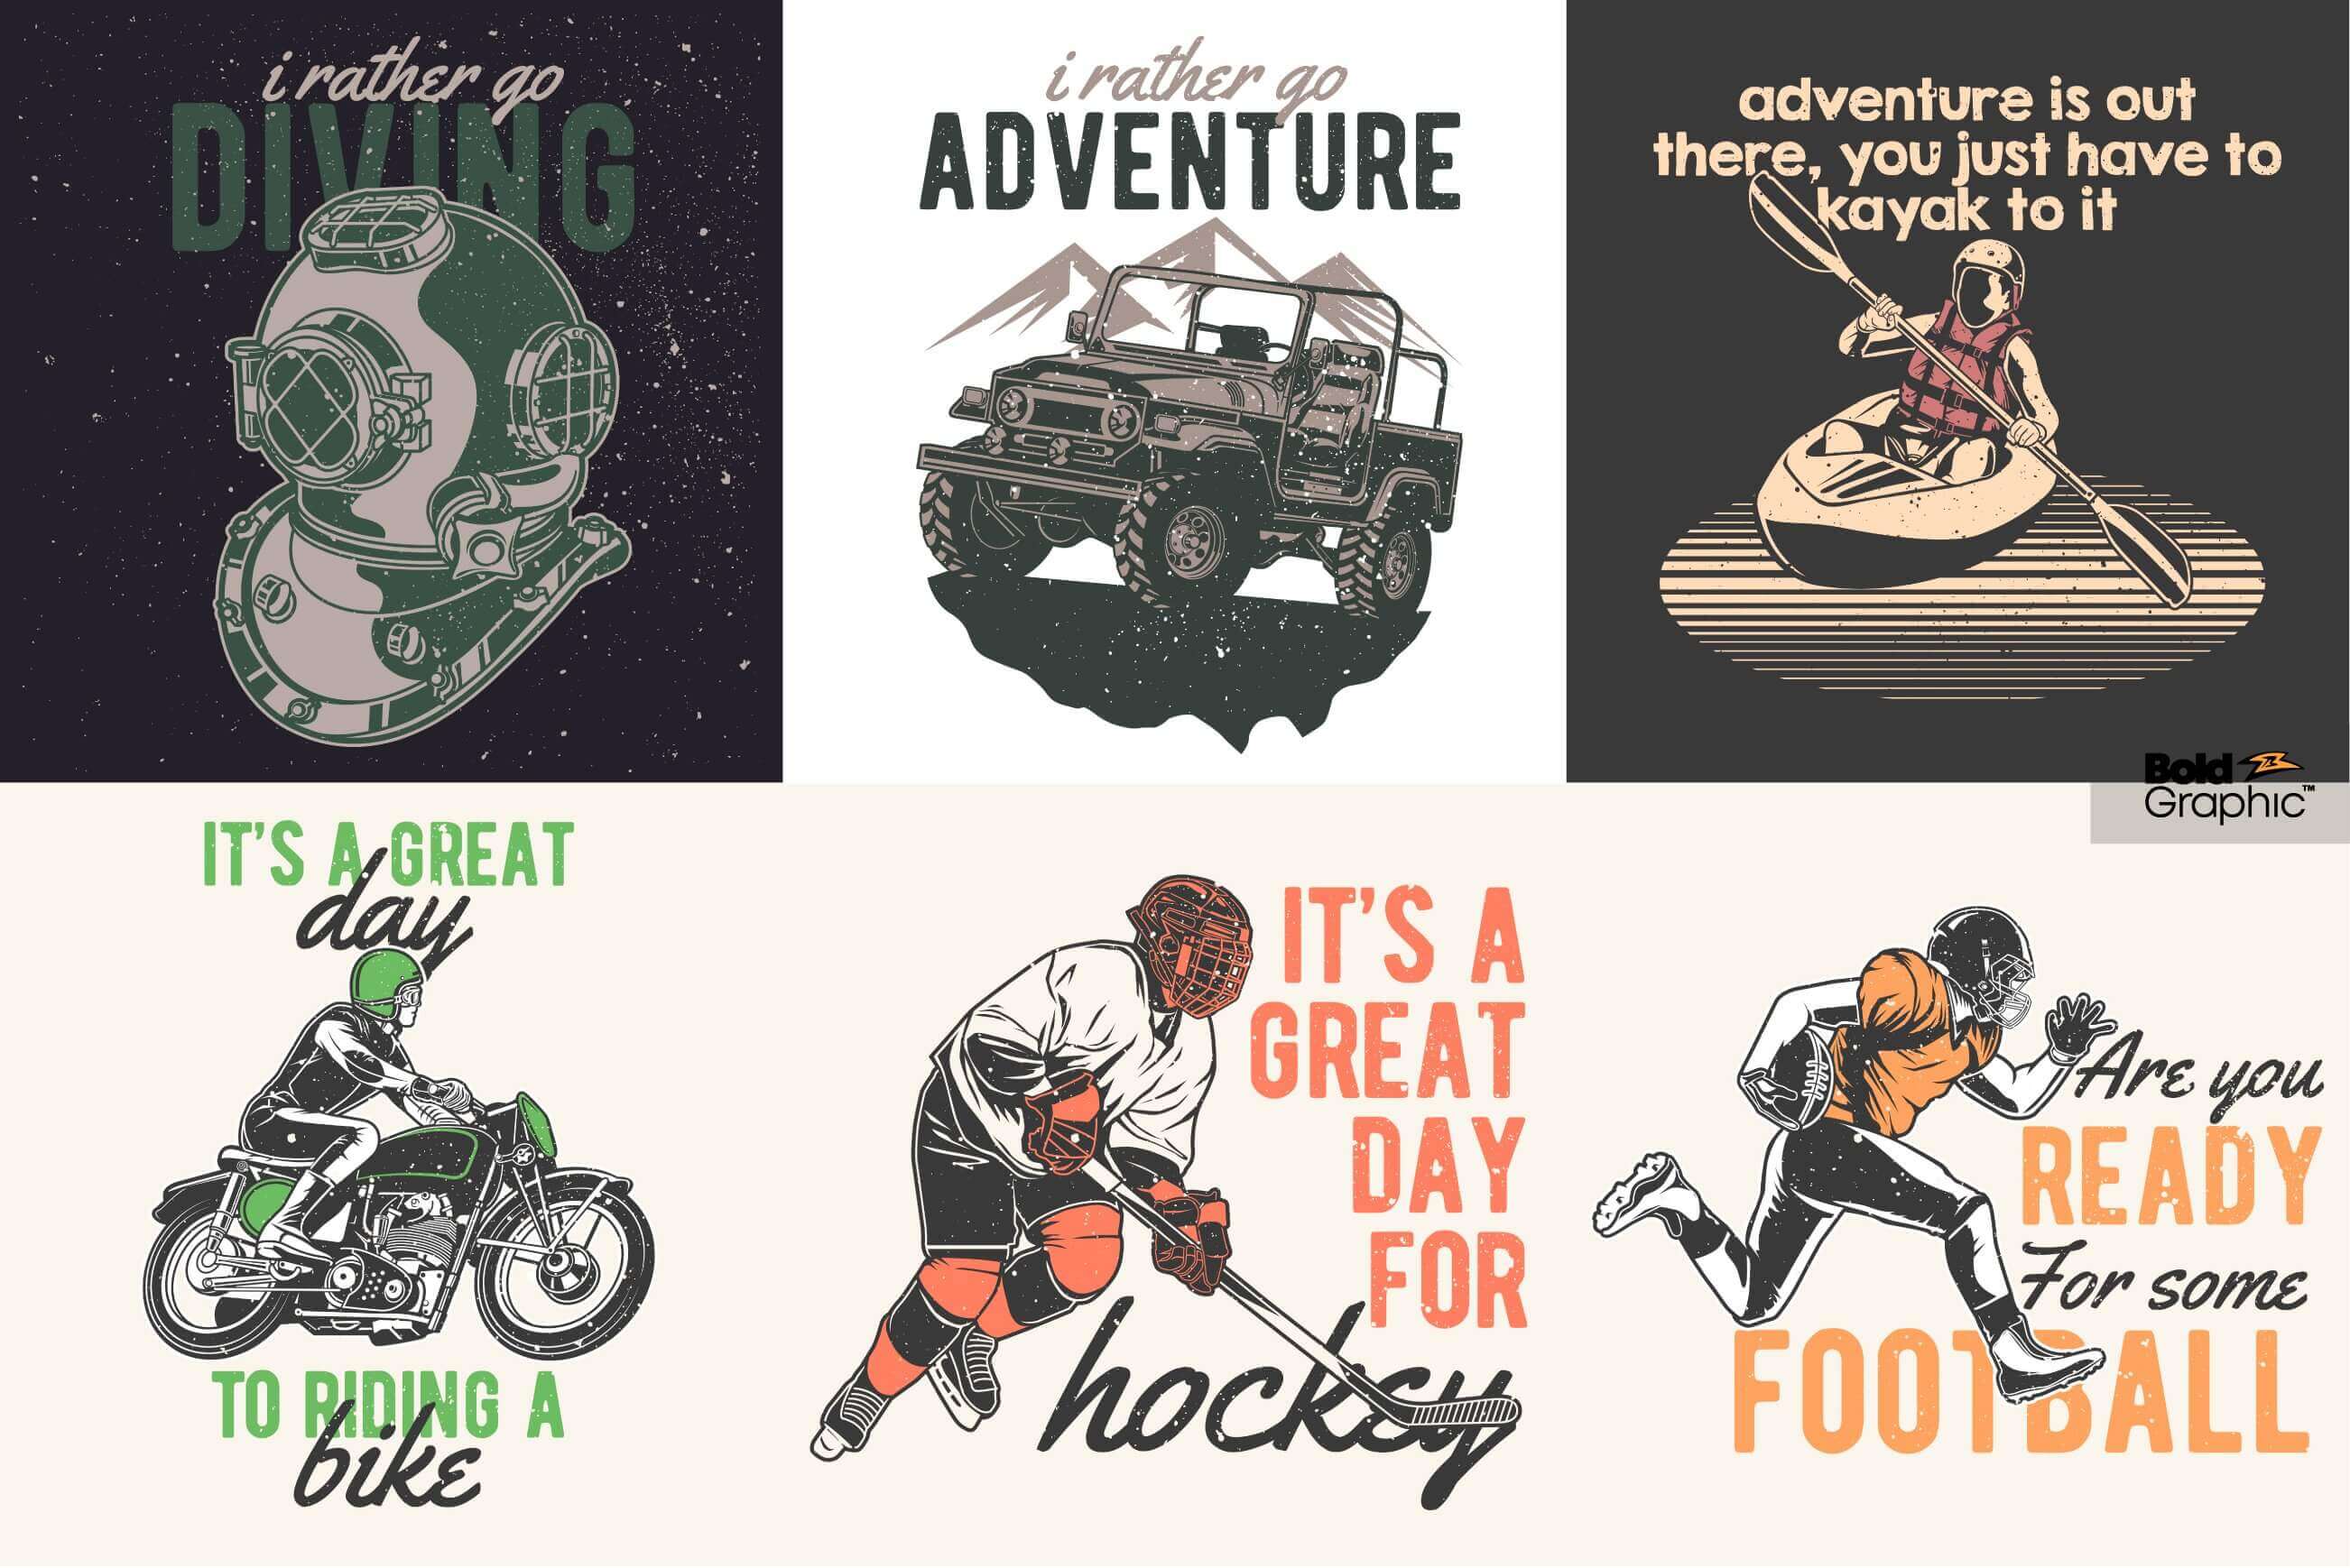 Images about Diving, Adventure, Riding, Hockey and Football.